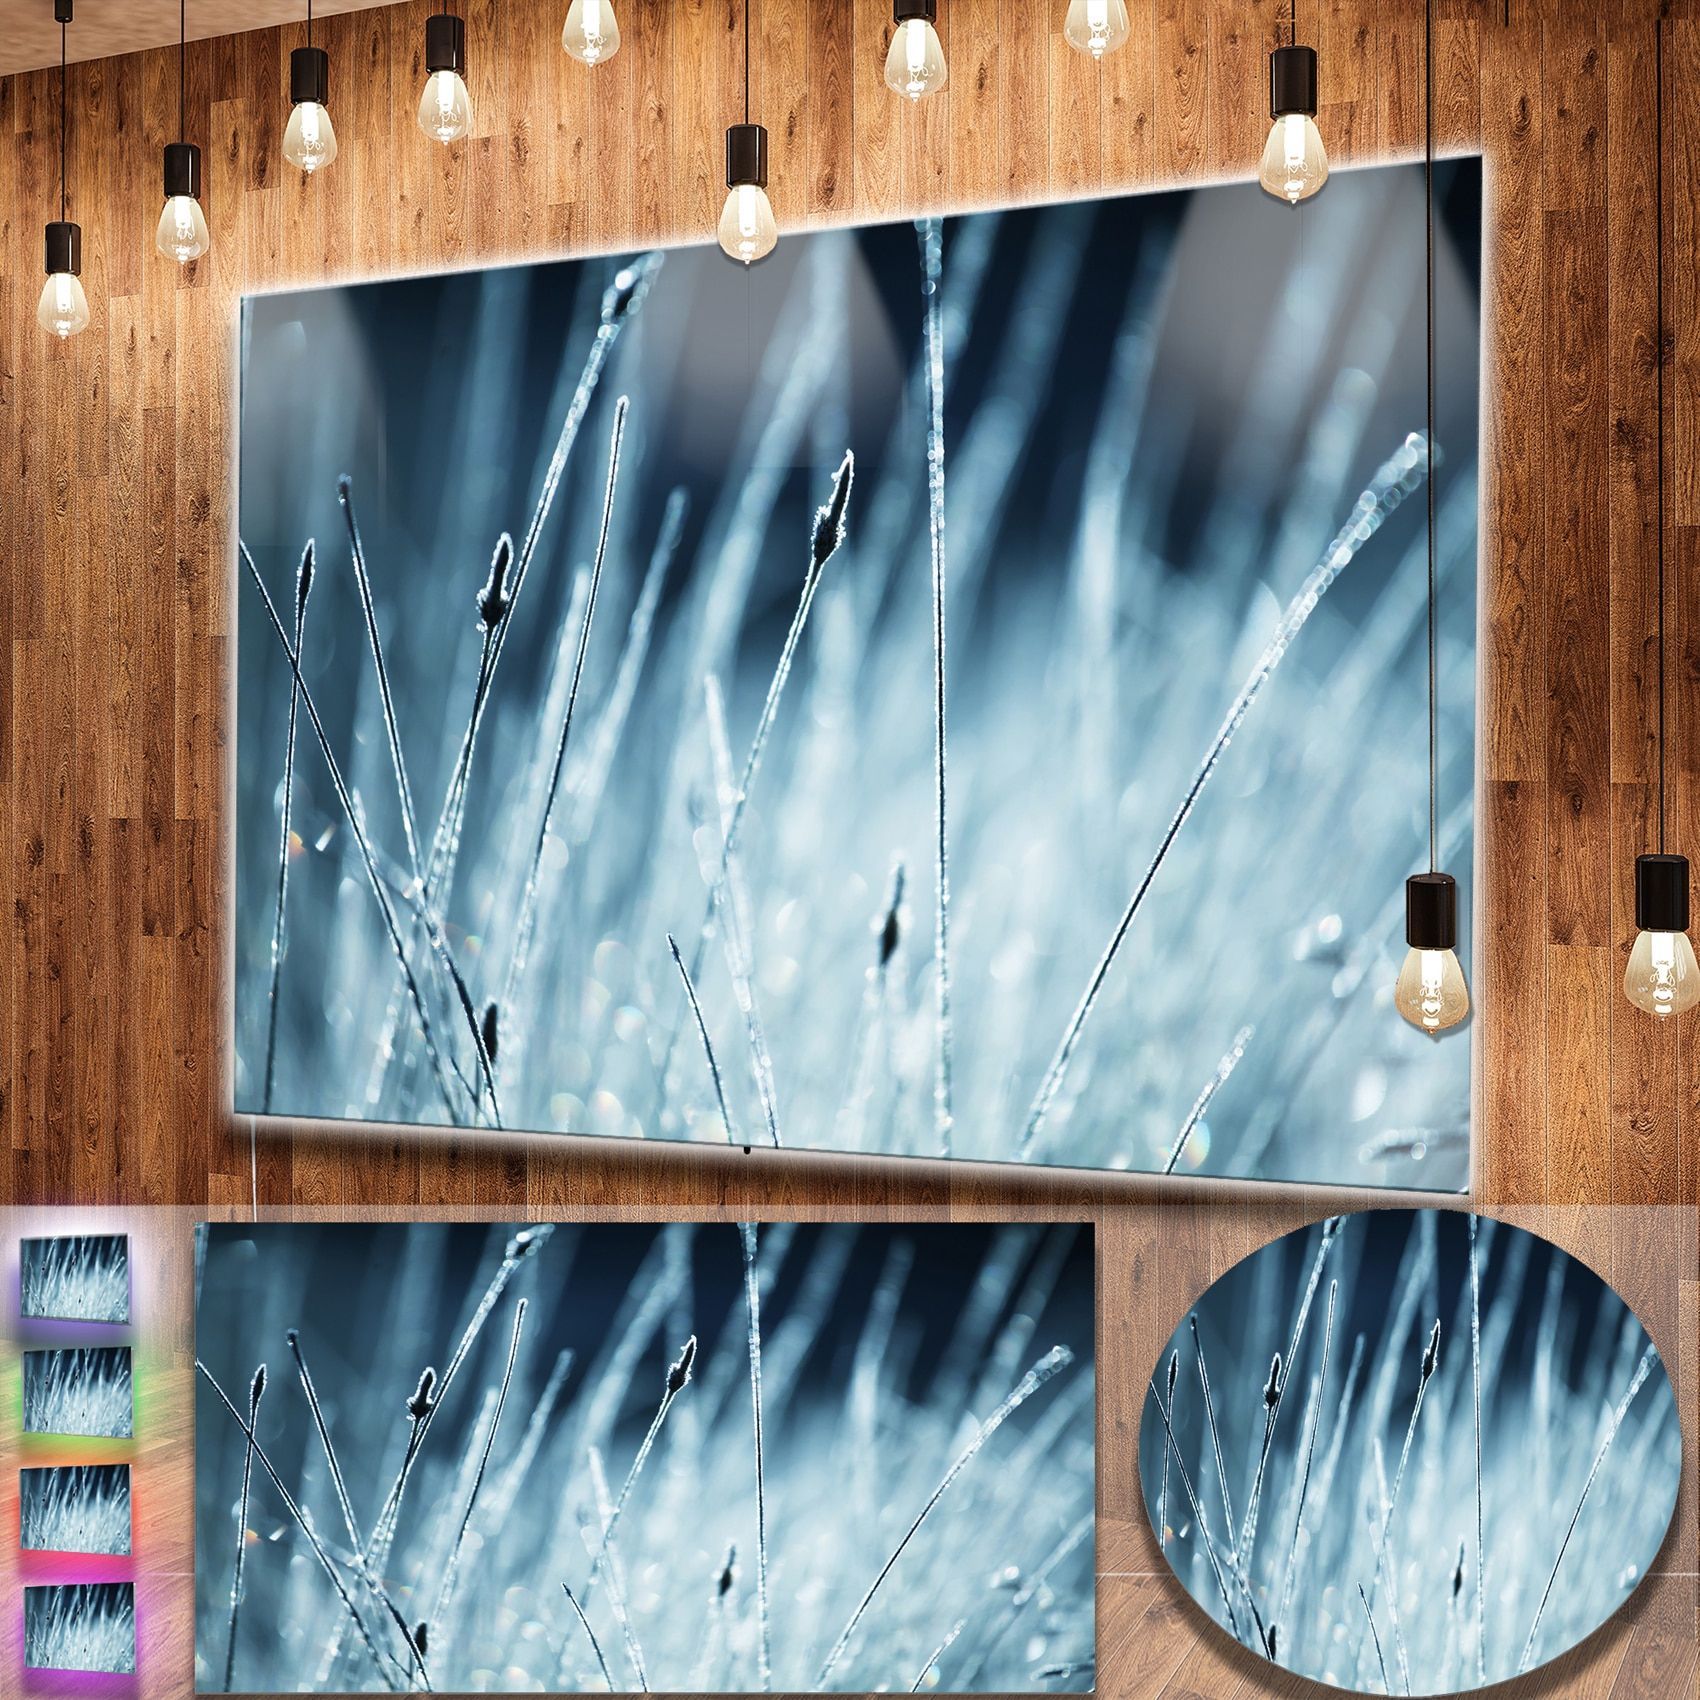 Designart 'Wet Grass Black and White' Large Flower Metal Wall Art by ...